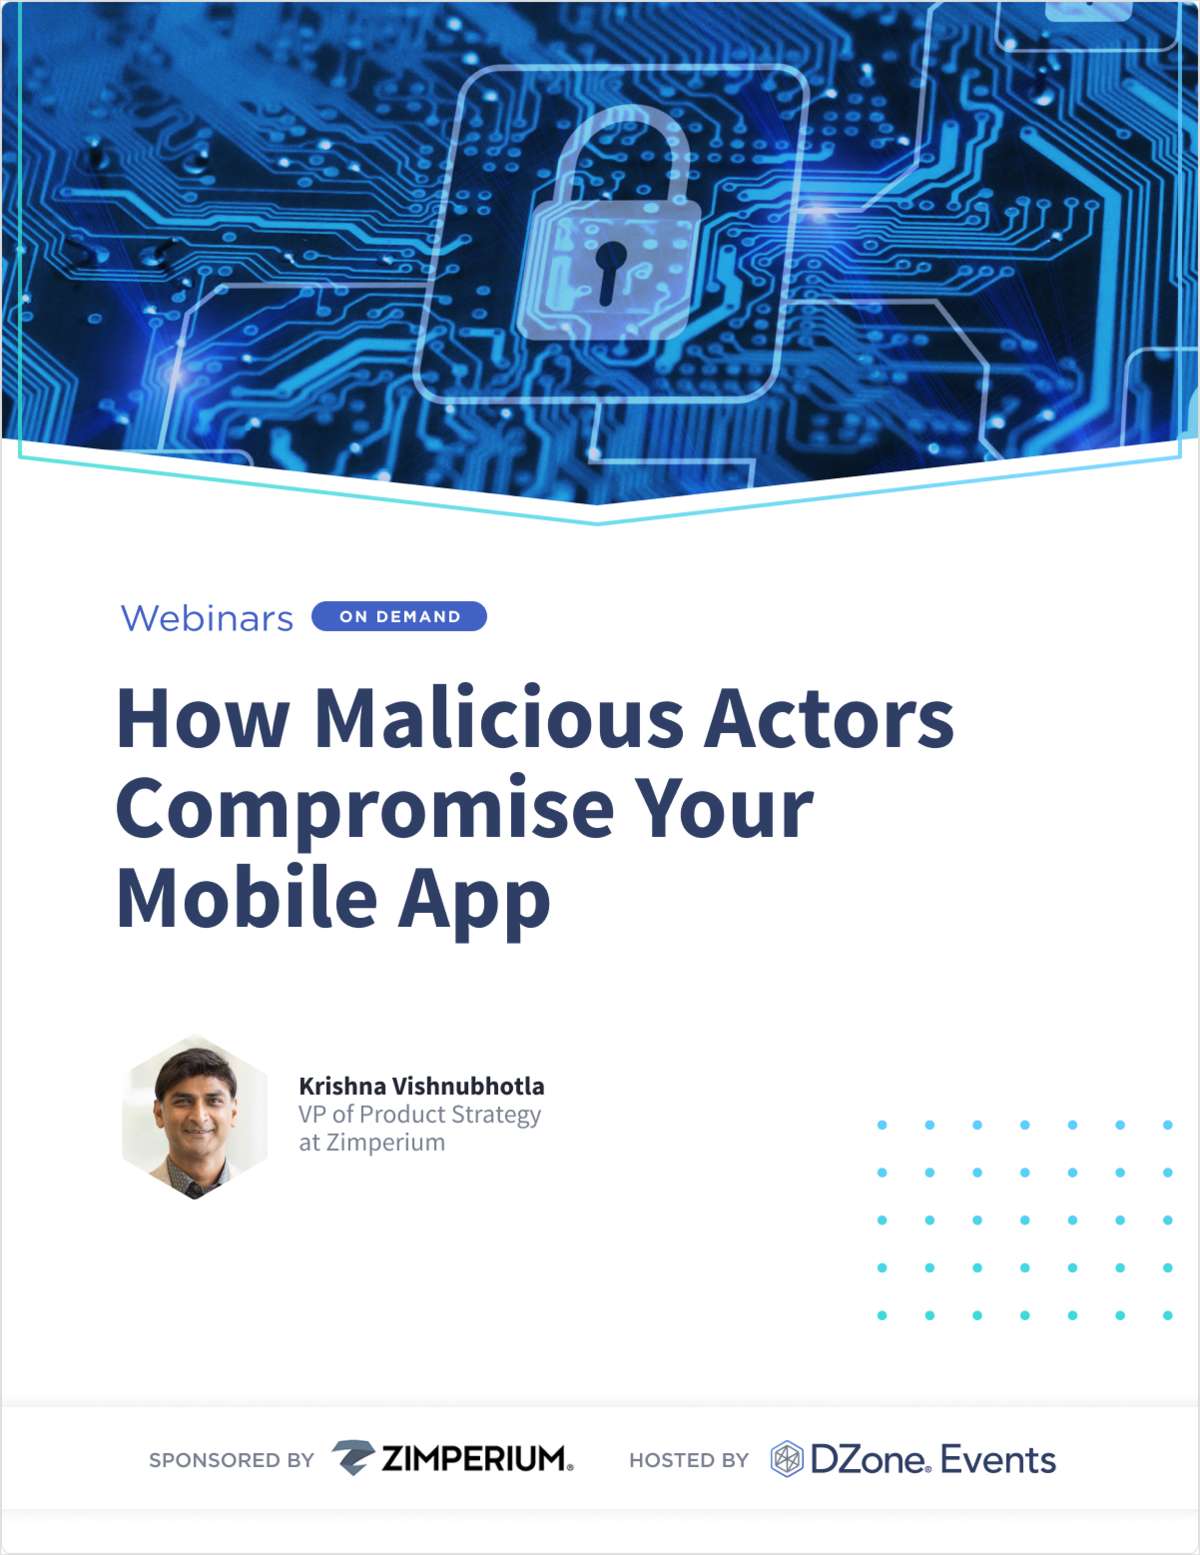 How Malicious Actors Compromise Your Mobile App